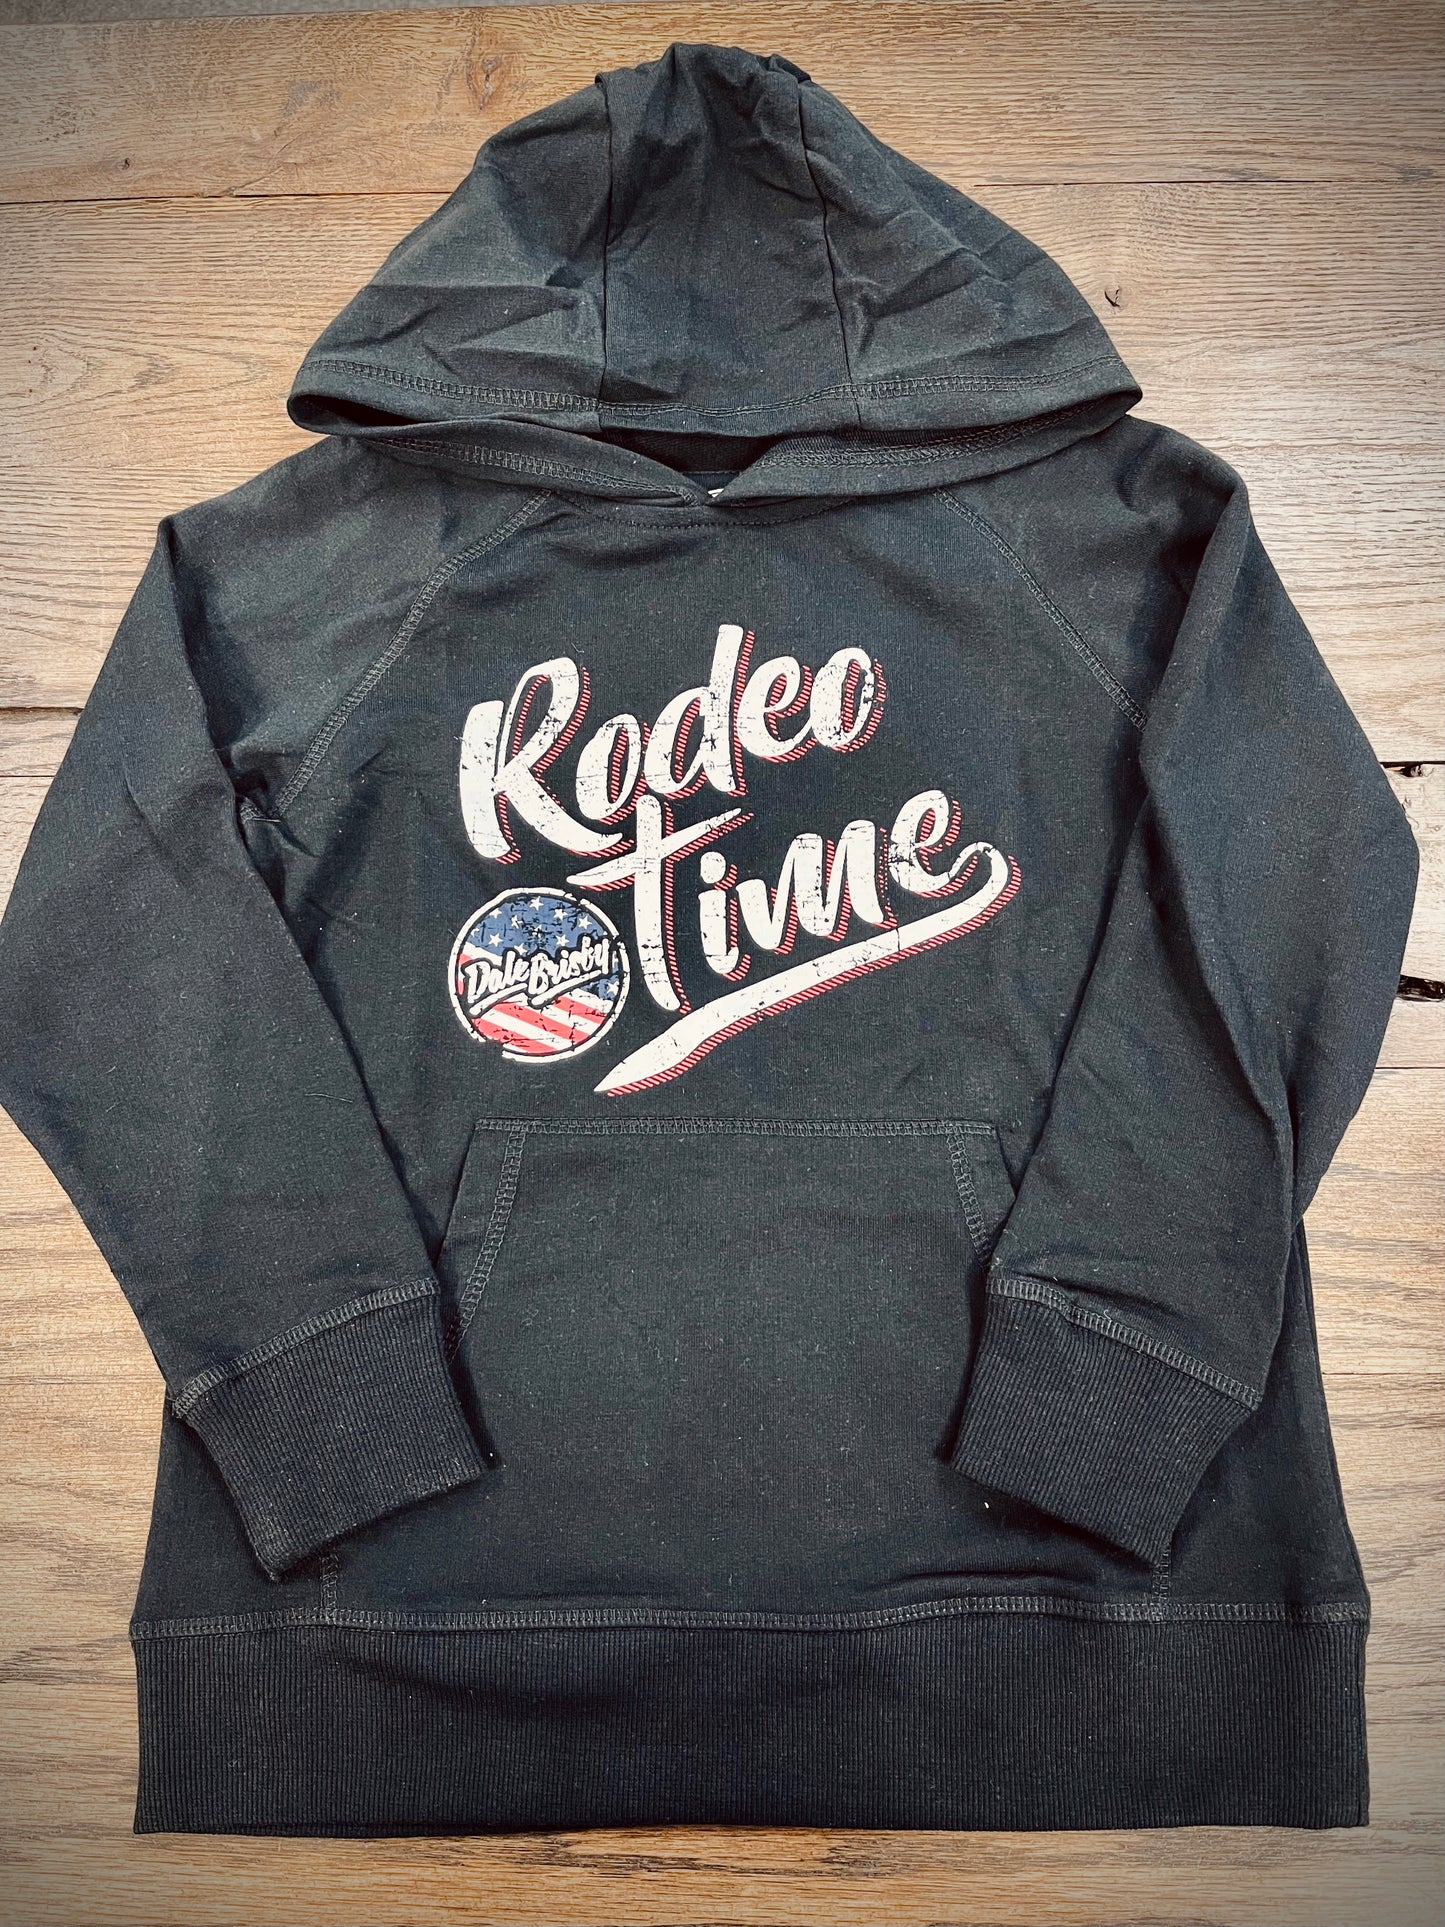 ROCK & ROLL BOYS LONG SLEEVE DALE BRISBY HOODIE RODEO TIME